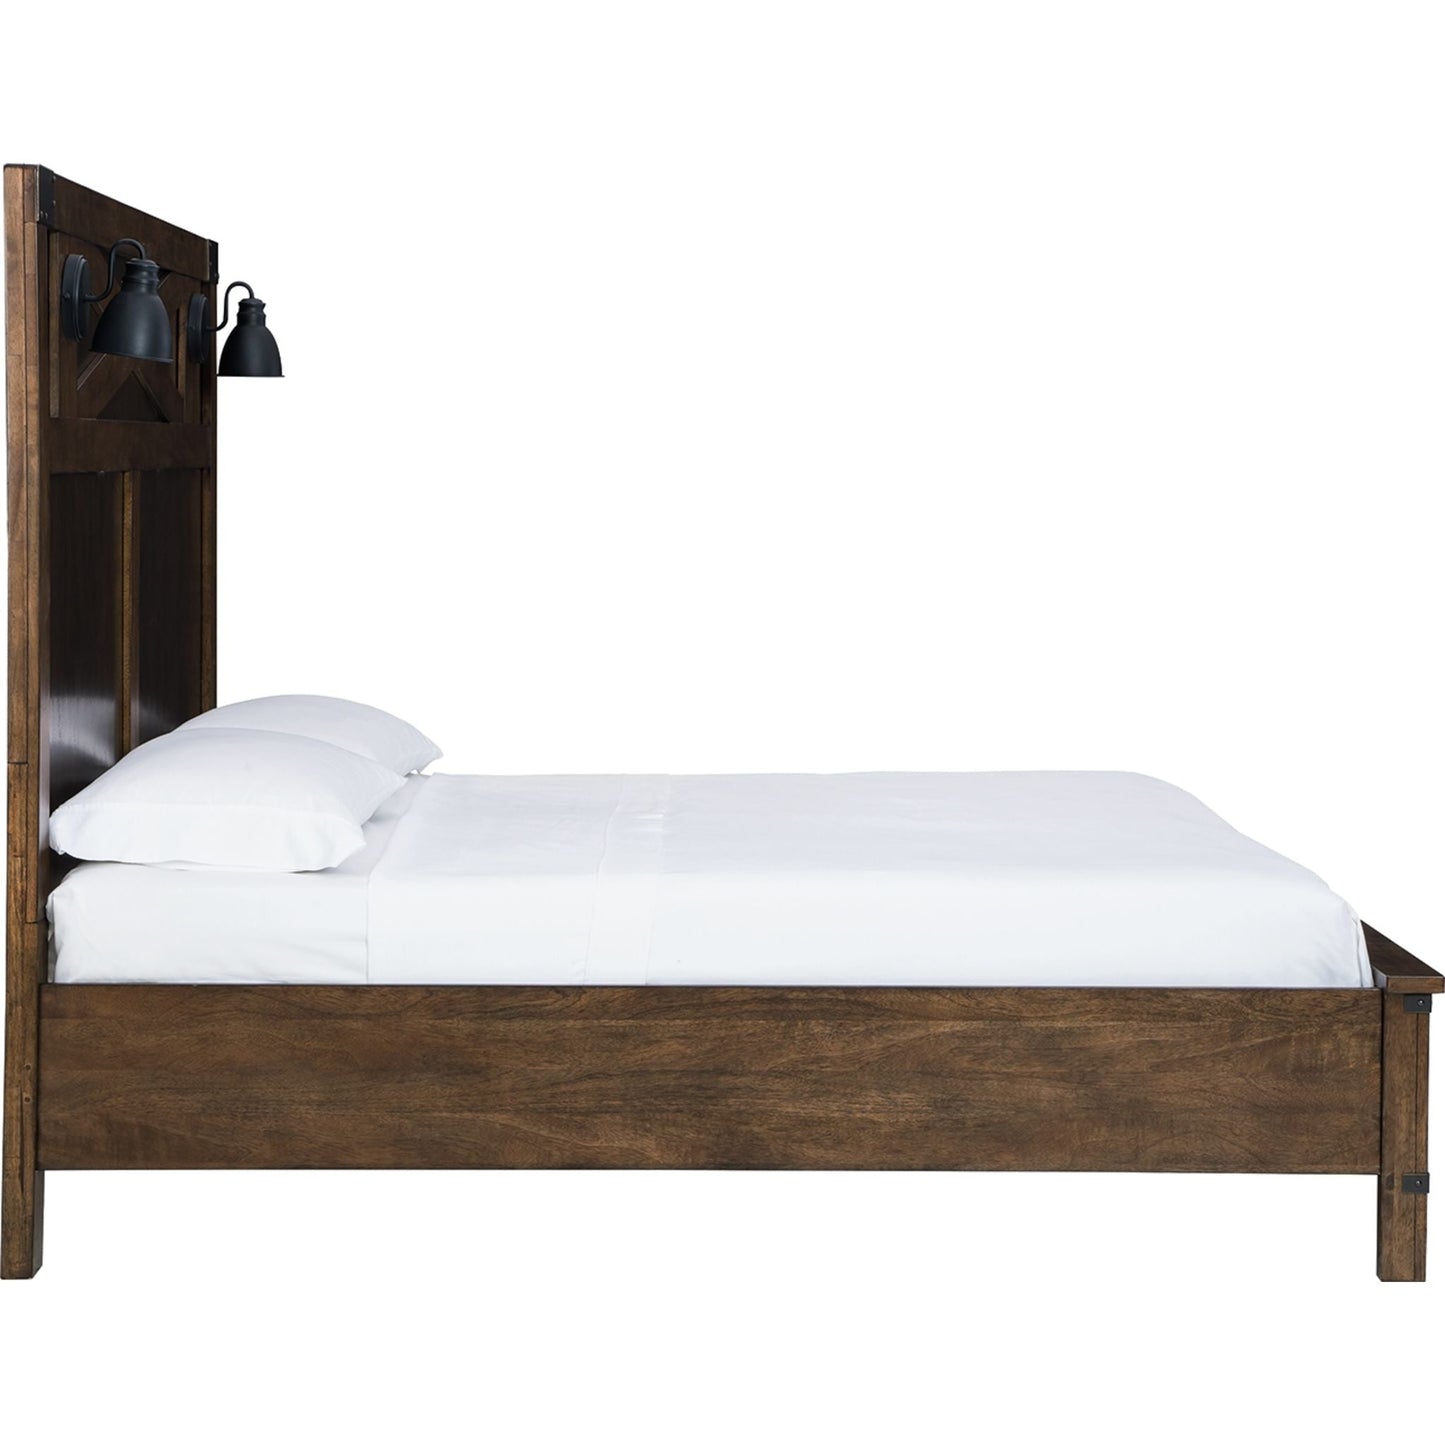 Wyattfield 3 Piece King Bed - Two-tone